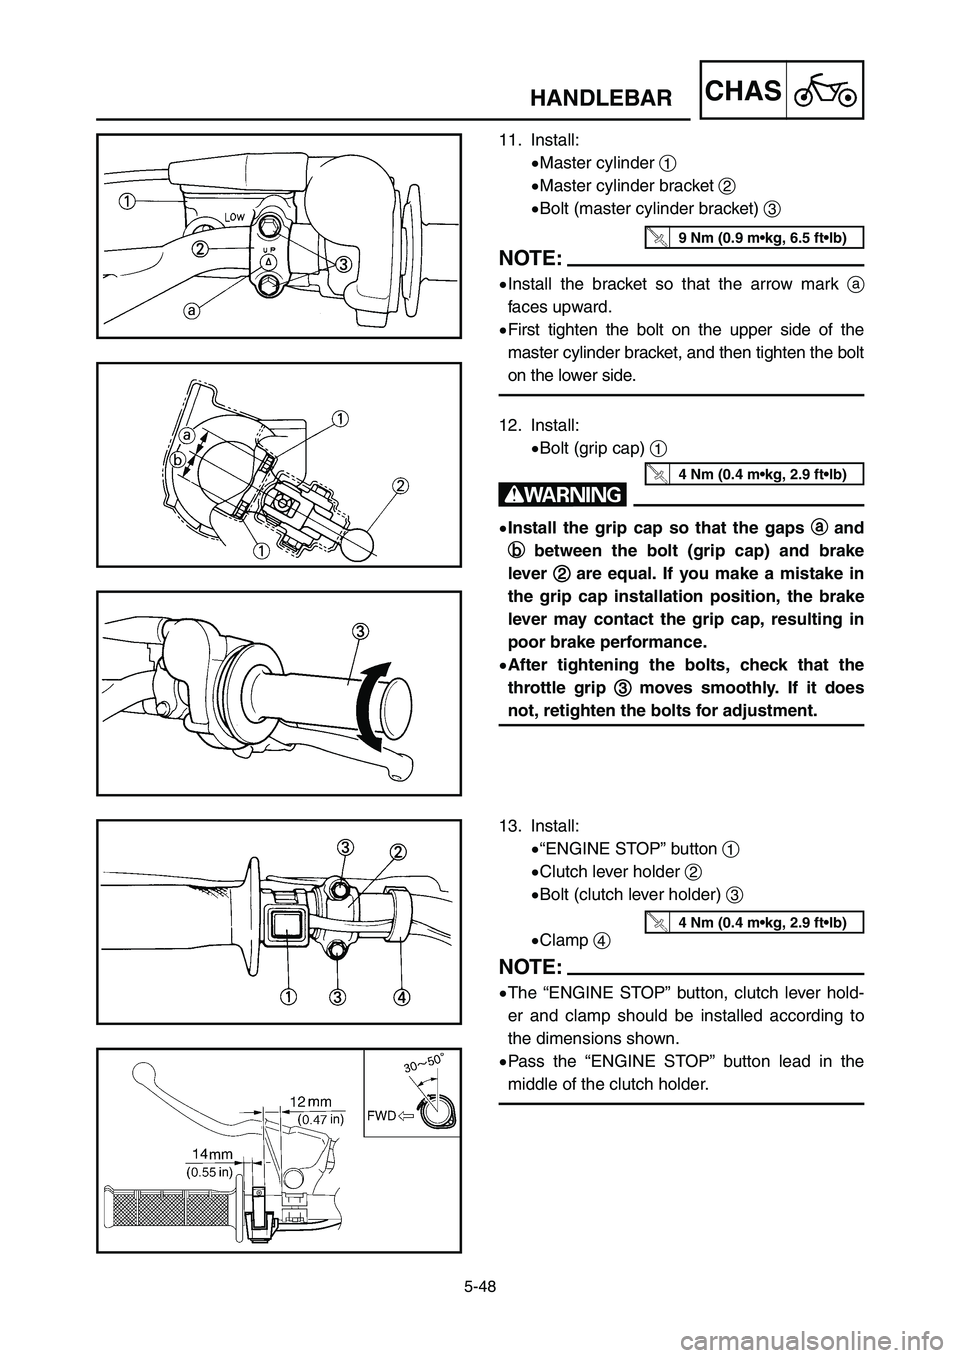 YAMAHA YZ125LC 2006  Owners Manual 5-48
CHASHANDLEBAR
13. Install:
9“ENGINE STOP” button 1
9Clutch lever holder 2
9Bolt (clutch lever holder) 3
9Clamp 4
NOTE:
9The “ENGINE STOP” button, clutch lever hold-
er and clamp should be